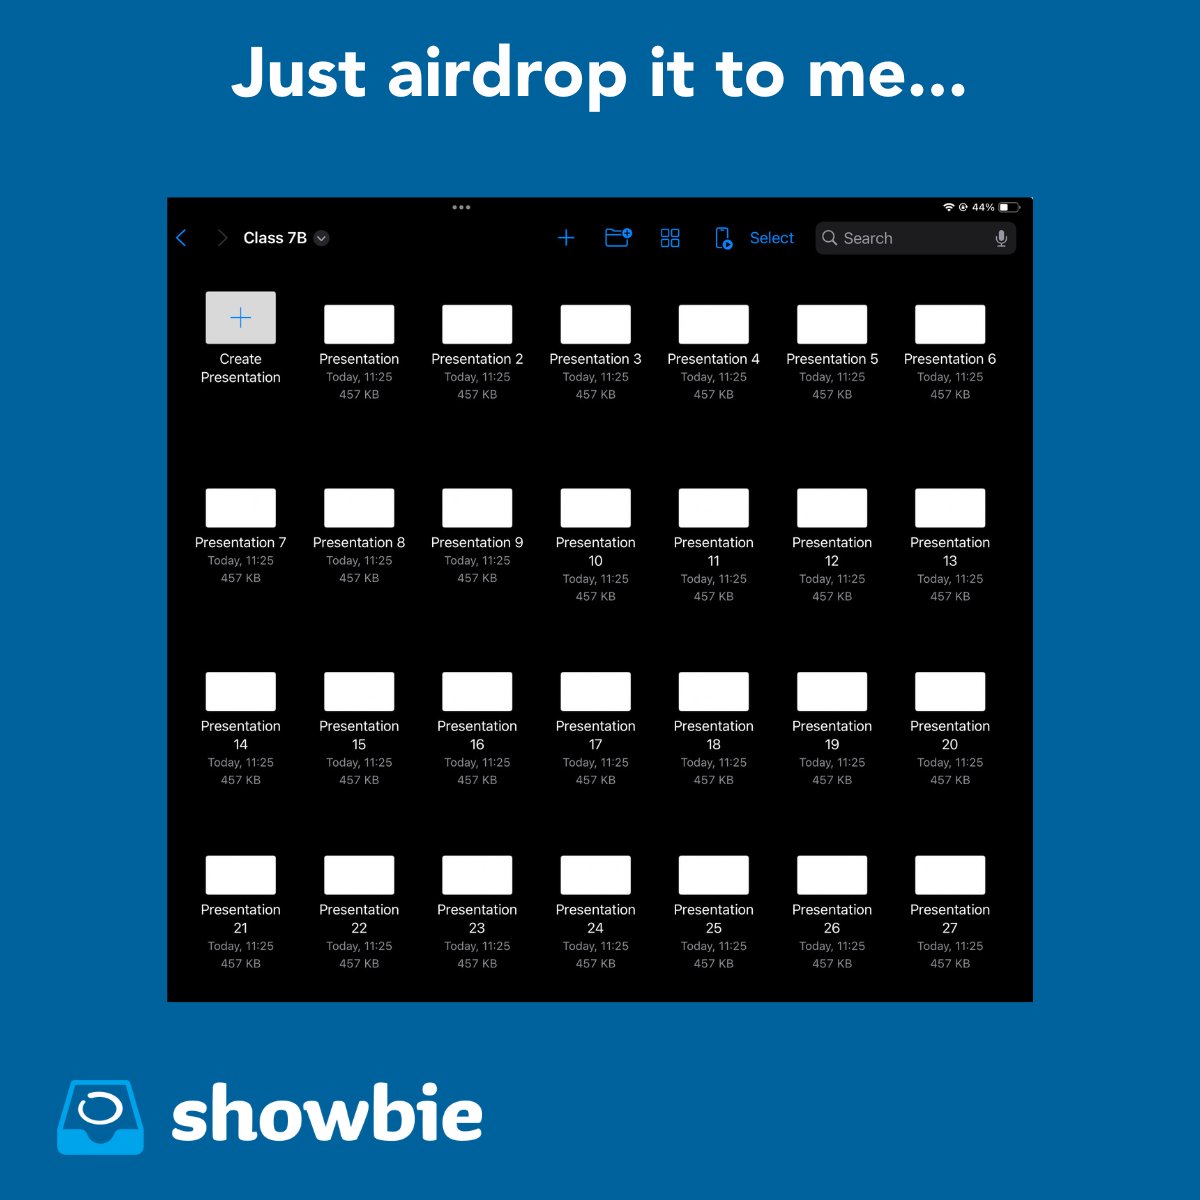 📁Need better organization for student work on iPad? Let Showbie help! Accept any file type, give personalized feedback, and make classroom management a breeze. 'Pop that work into Showbie for me...' 💙🚀